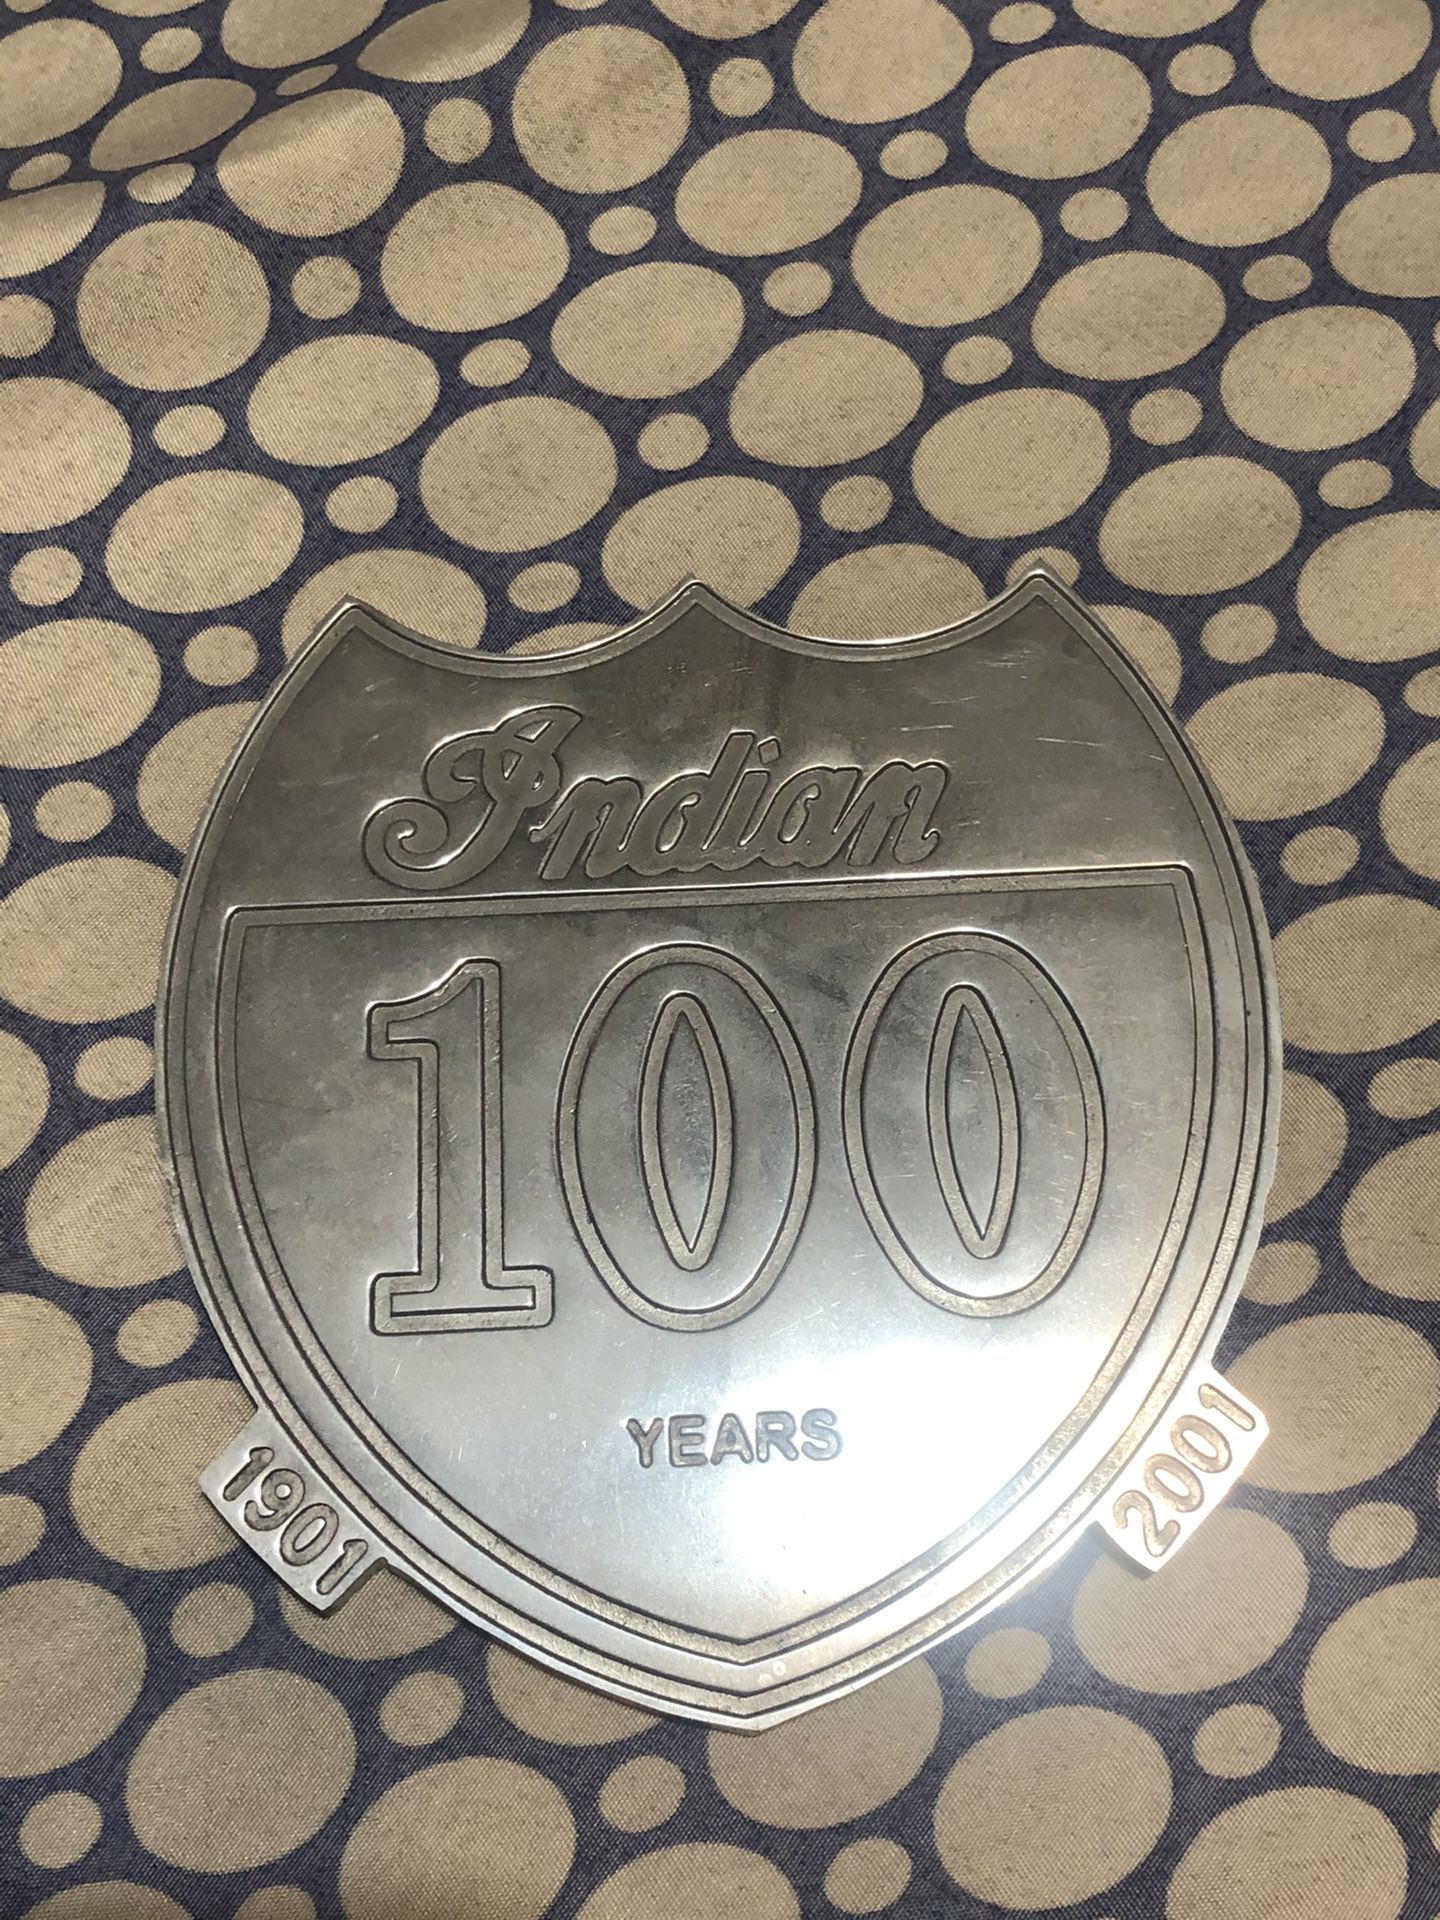 Indian 100 Years Plaque